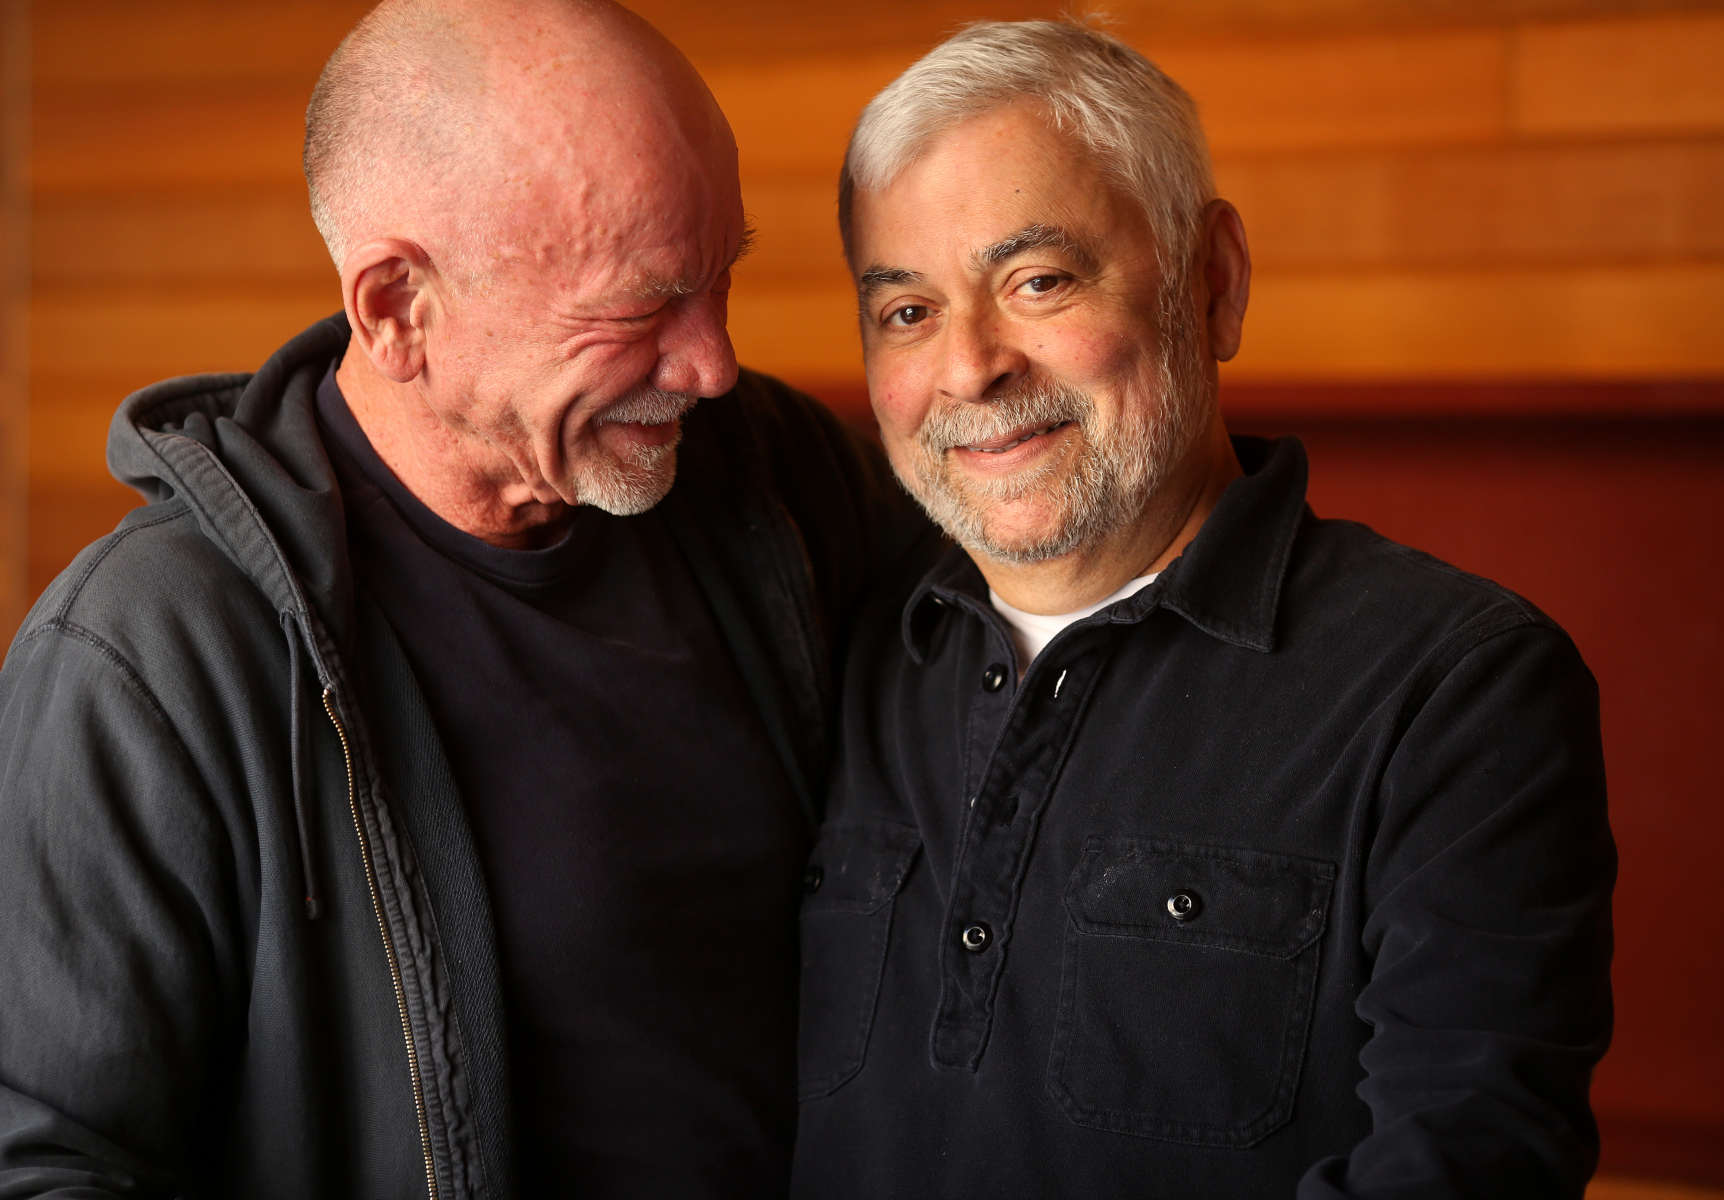 Art Johnston, 69, left, and his partner Jose Pena, 69, are pictured at Sidetracks in Chicago. The two, who have been together for 39 years and own the bar together, have a civil union. "I didn't think it would change anything," said Johnston on getting a civil union. "But it did. It's different."   : People : Madison | Milwaukee | Chicago | Writer | Photographer | Keri Wiginton | Portrait photography | Travel | Corporate | Photojournalist | Editorial | Environmental